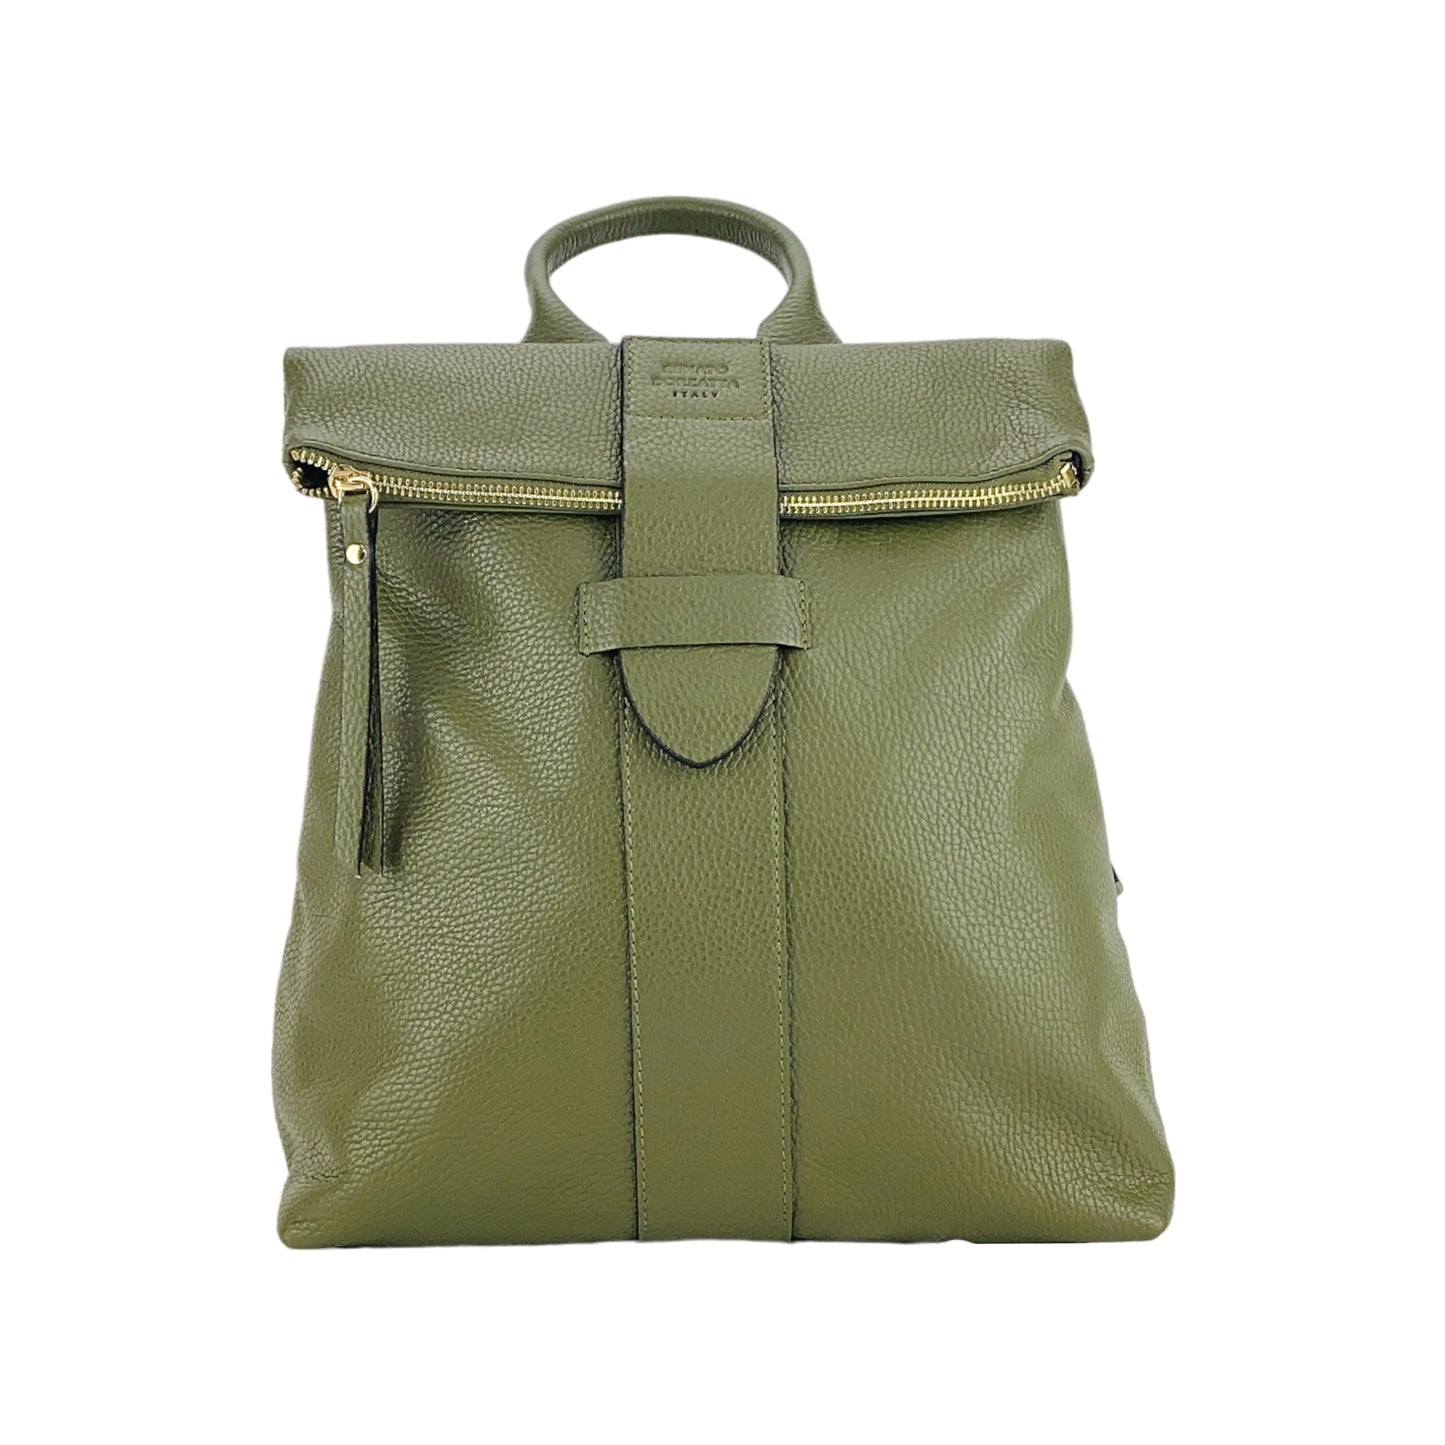 RB1021E | Soft women's backpack in genuine leather Made in Italy with adjustable shoulder straps. Zipper and accessories in shiny gold metal - Green color - Dimensions: 30 x 34 x 10.5 cm-2